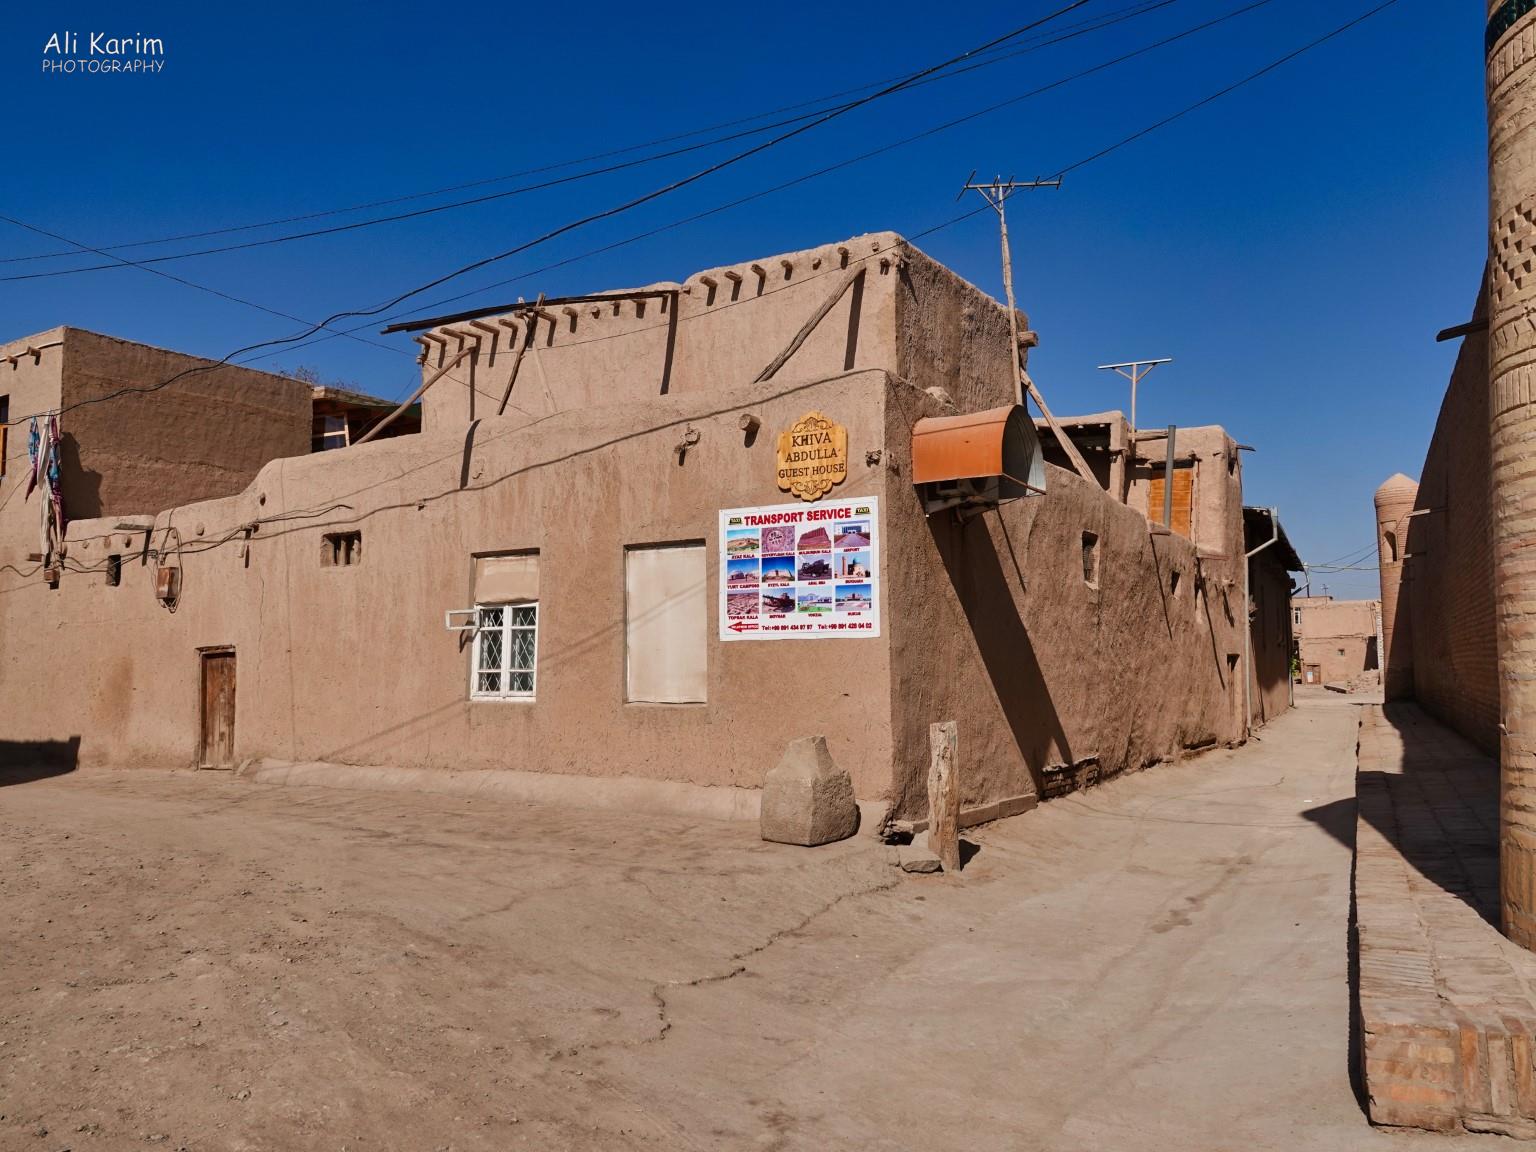 Khiva, Oct 2019, Guesthouses were everywhere